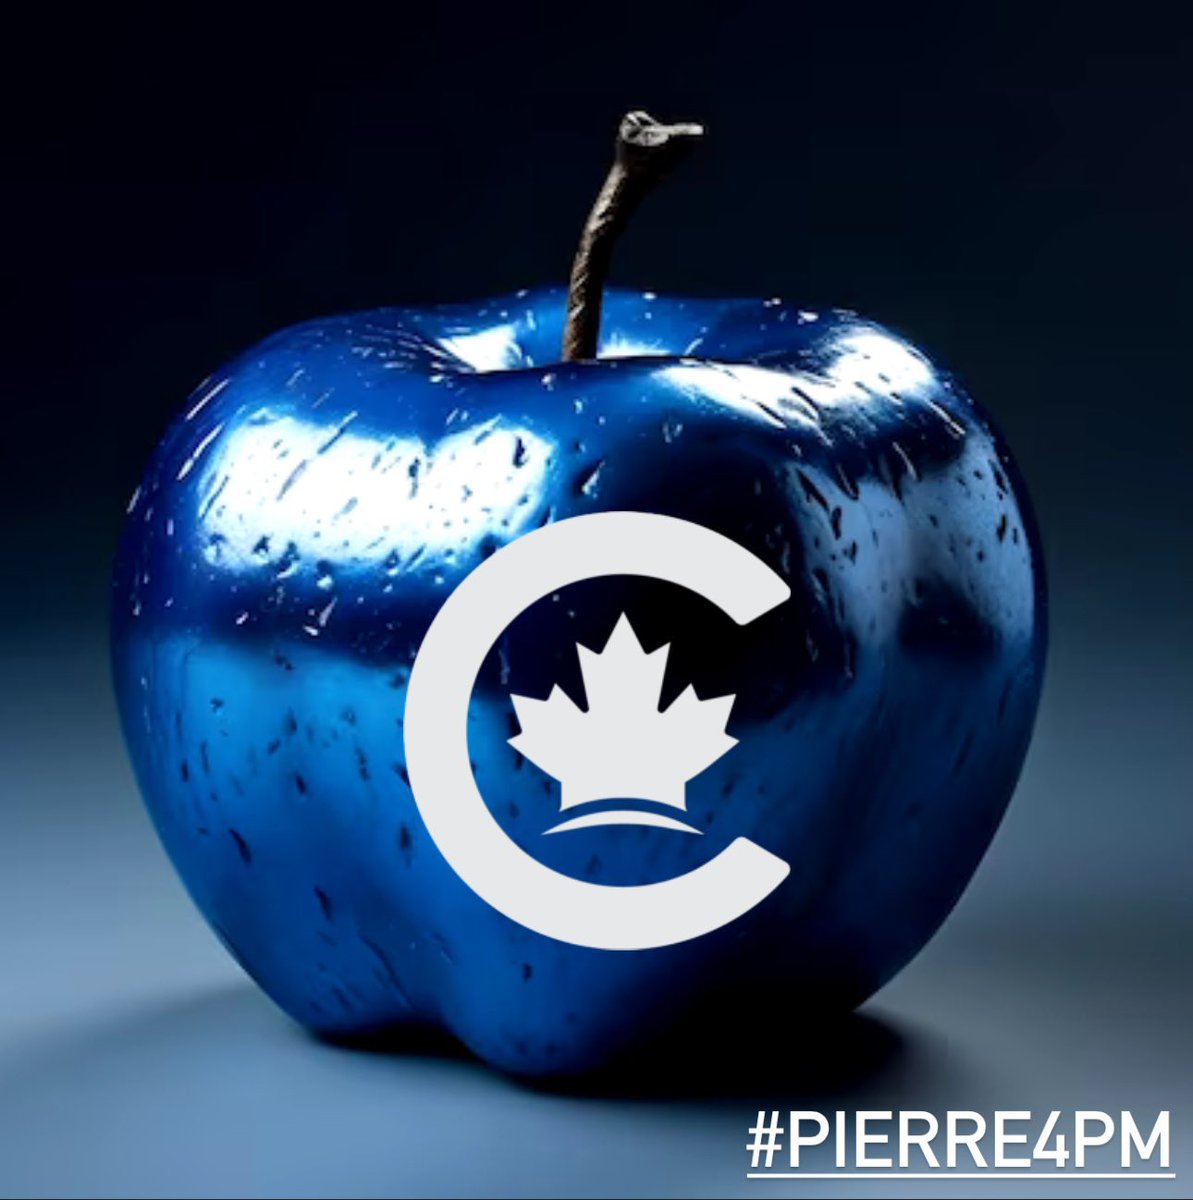 @liberal_party Thank you @liberal_party for pointing out how @PierrePoilievre will bring Canada back to when Life was more affordable, more peaceful, more prosperous and much more productive and secure. Cannot wait until a lot less WACKOS in Government. 
#TrudeauBrokeCanada 
#Pierre4PM